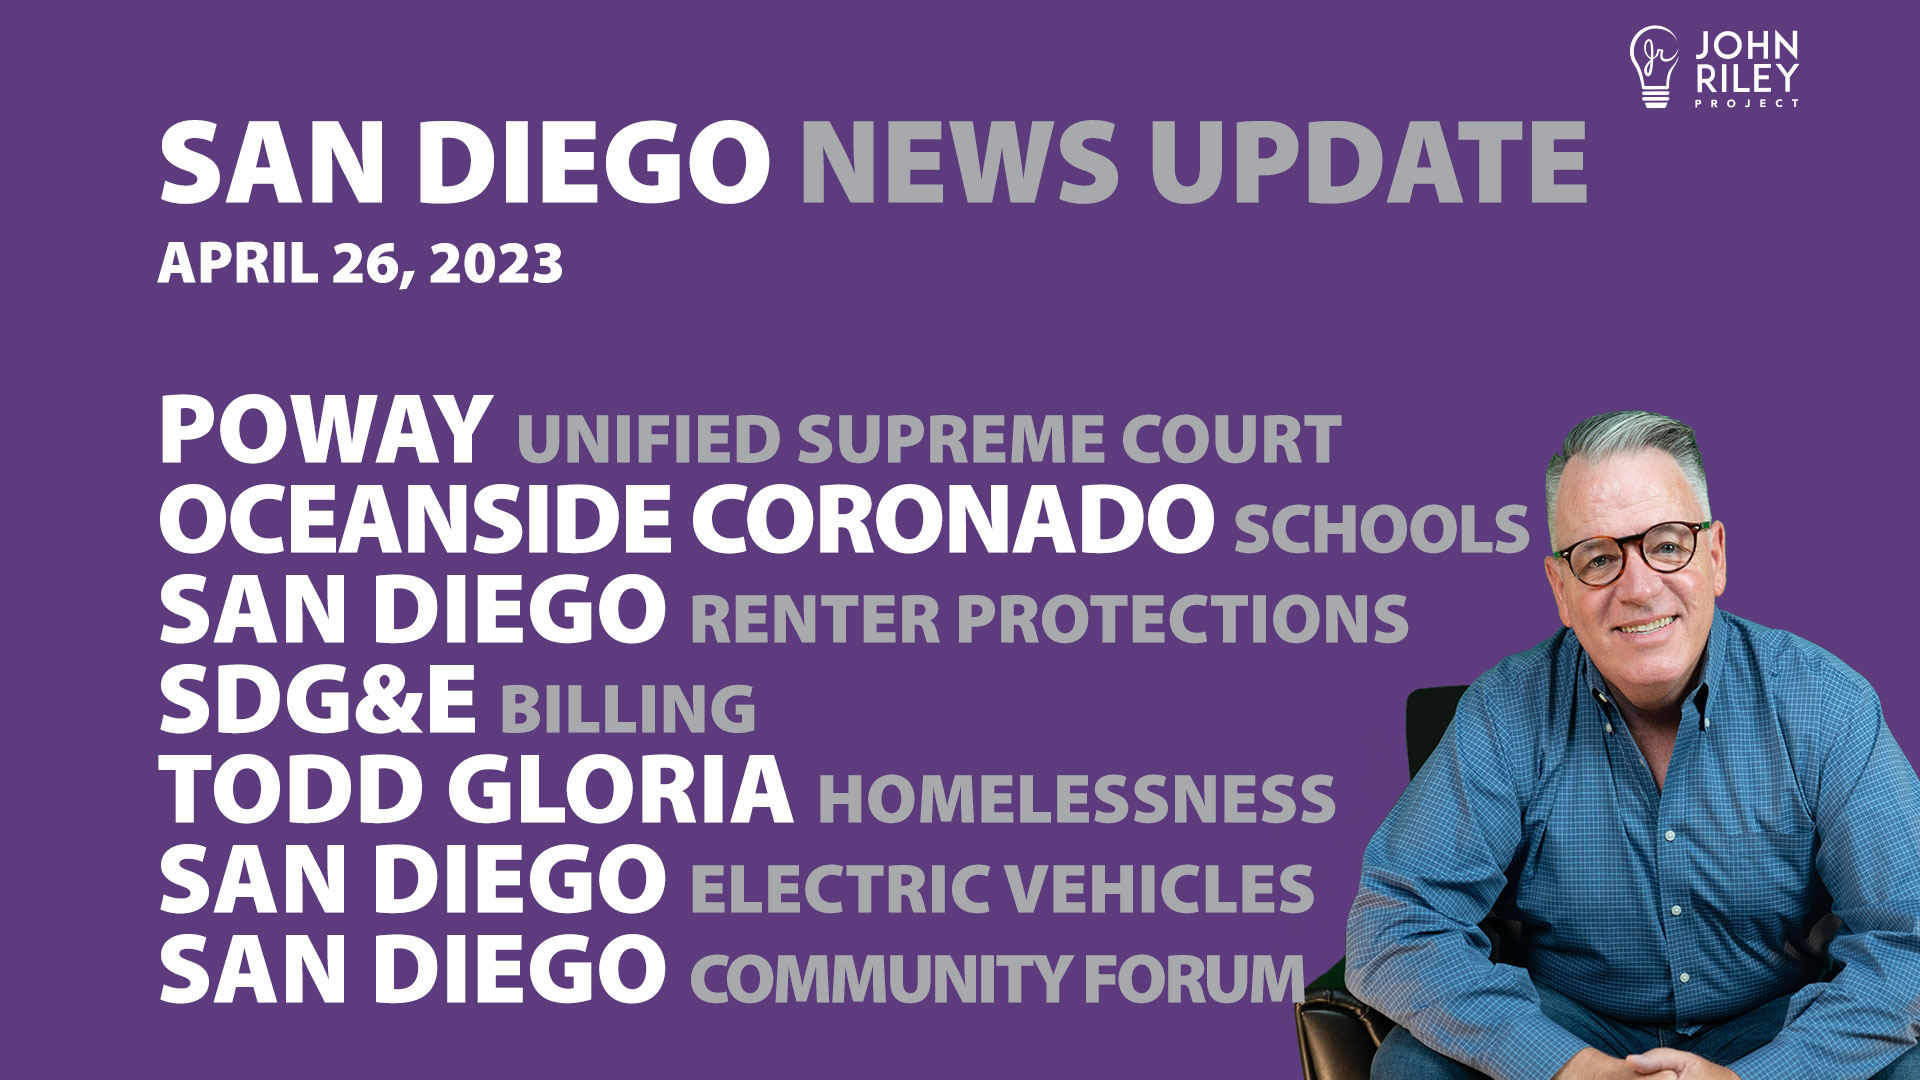 John Riley discusses Poway Unified heading to Supreme Court, San Diego Renter Protections, and Electric Vehicles.